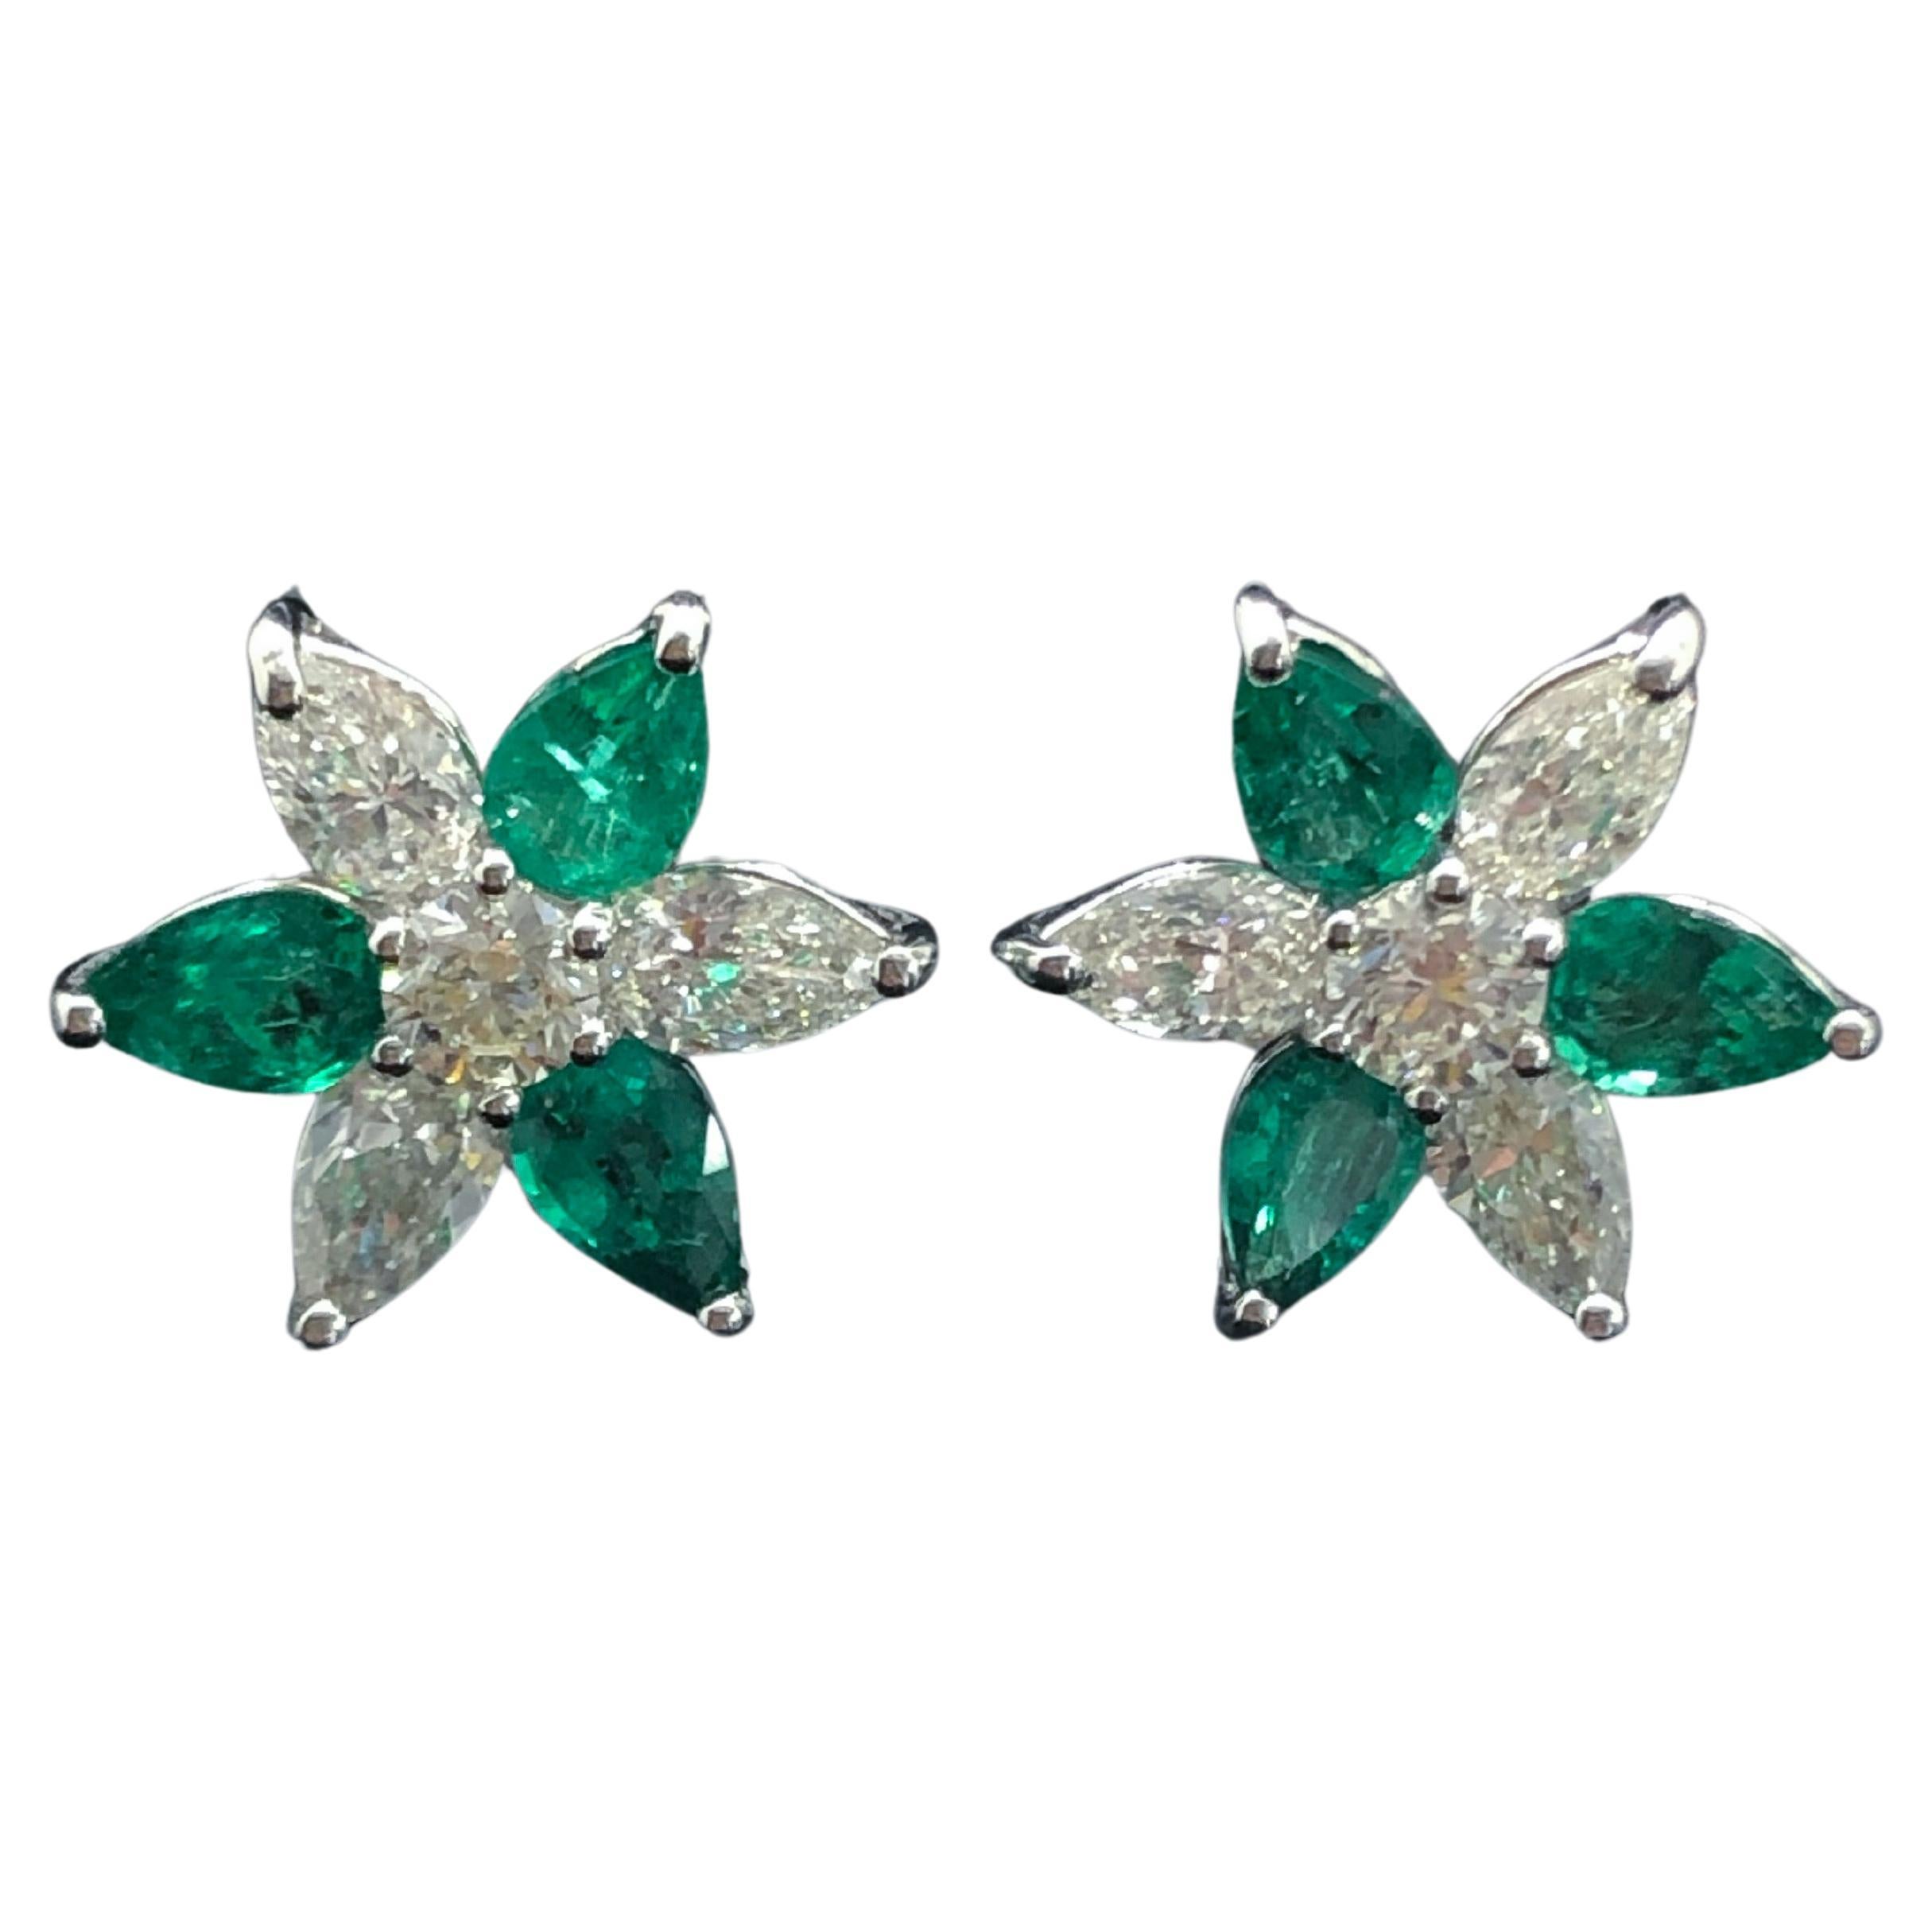 The platinum pear shape diamond and pear shape emerald star earrings are a classic design that exudes elegance. With a combination of a 2.27 CTS of emerald, 1.83 CTS pear shape diamond, and 0.60 carat of round diamonds, these earrings are truly a